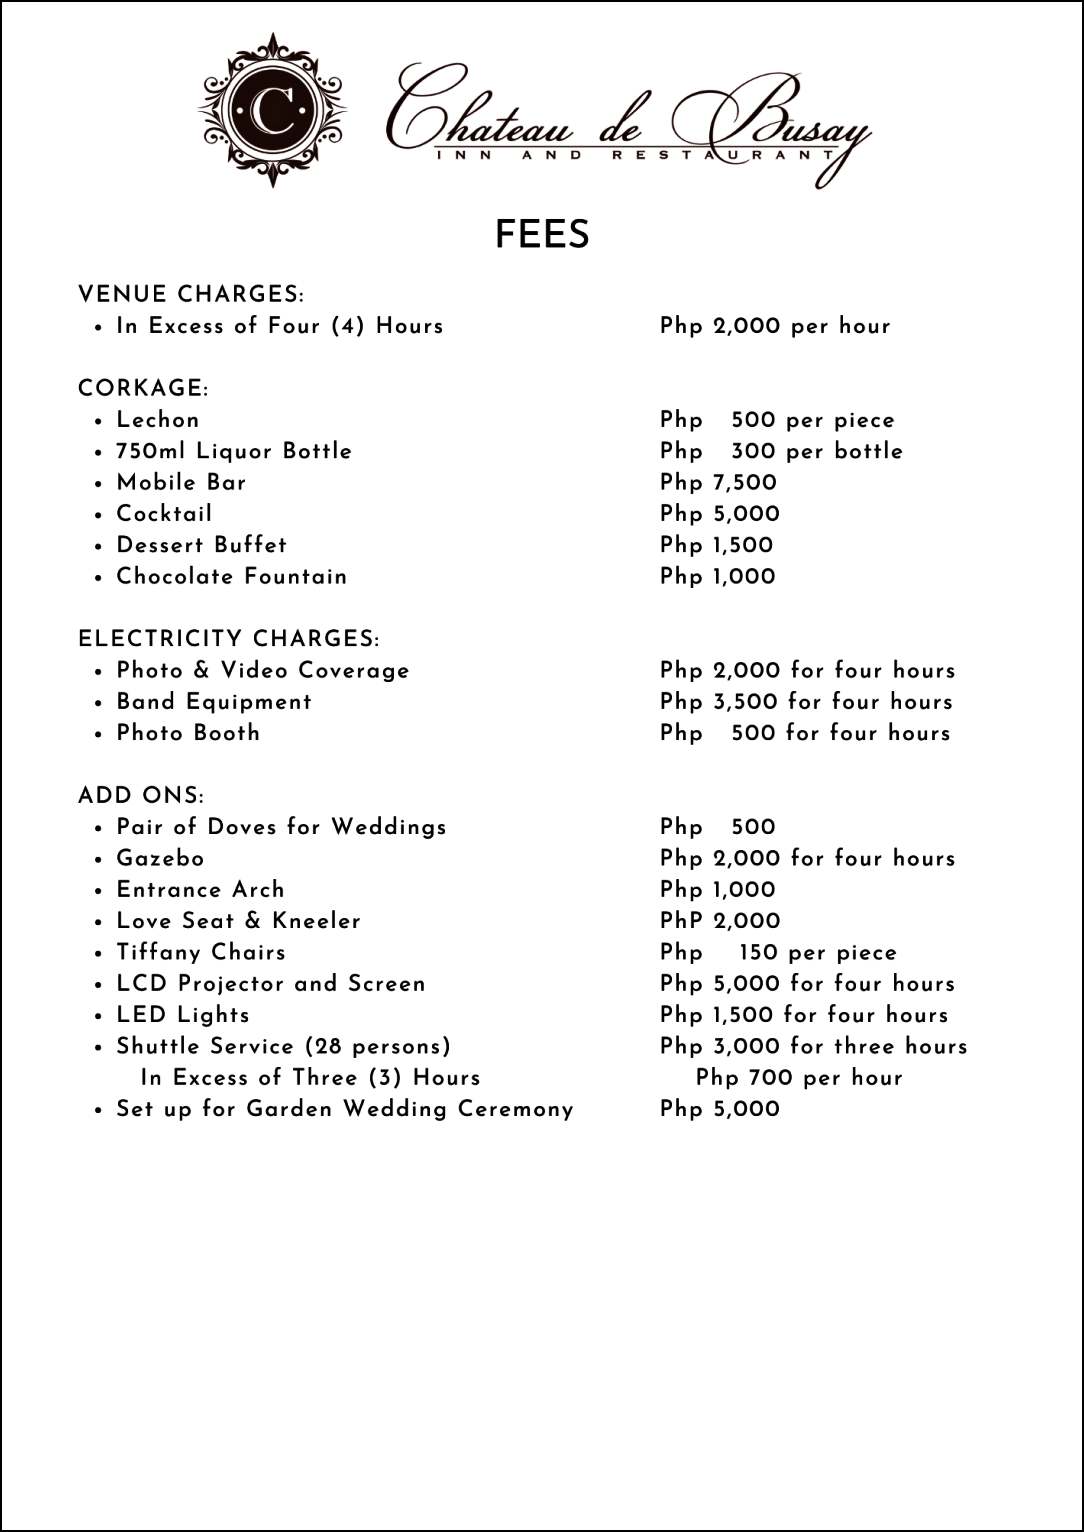 OTHER FEES